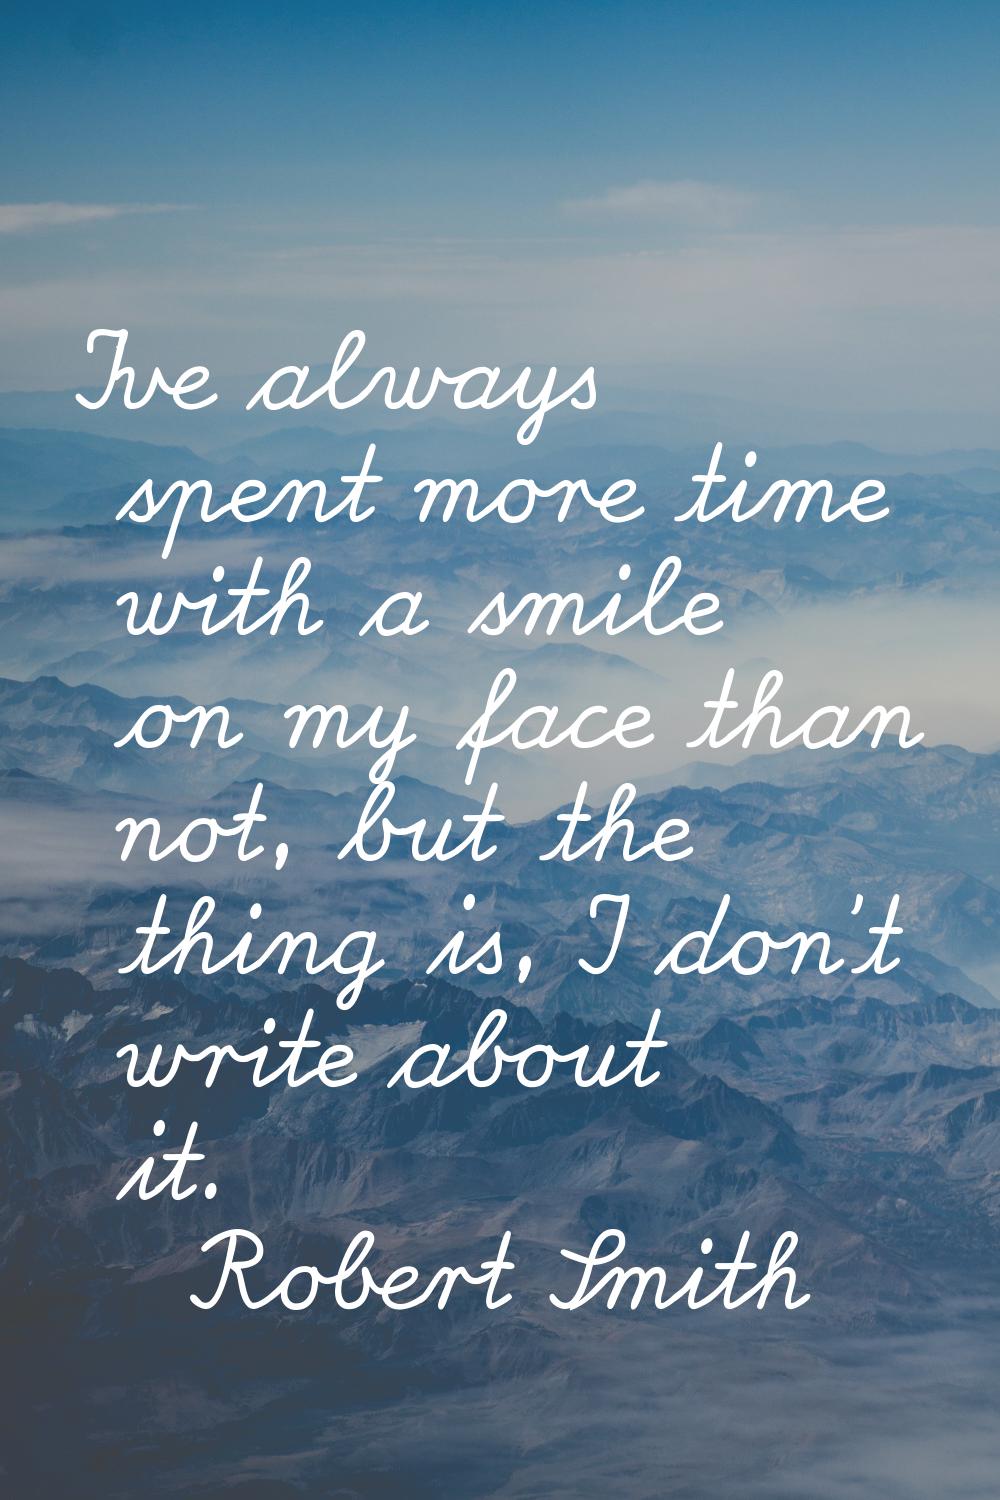 I've always spent more time with a smile on my face than not, but the thing is, I don't write about